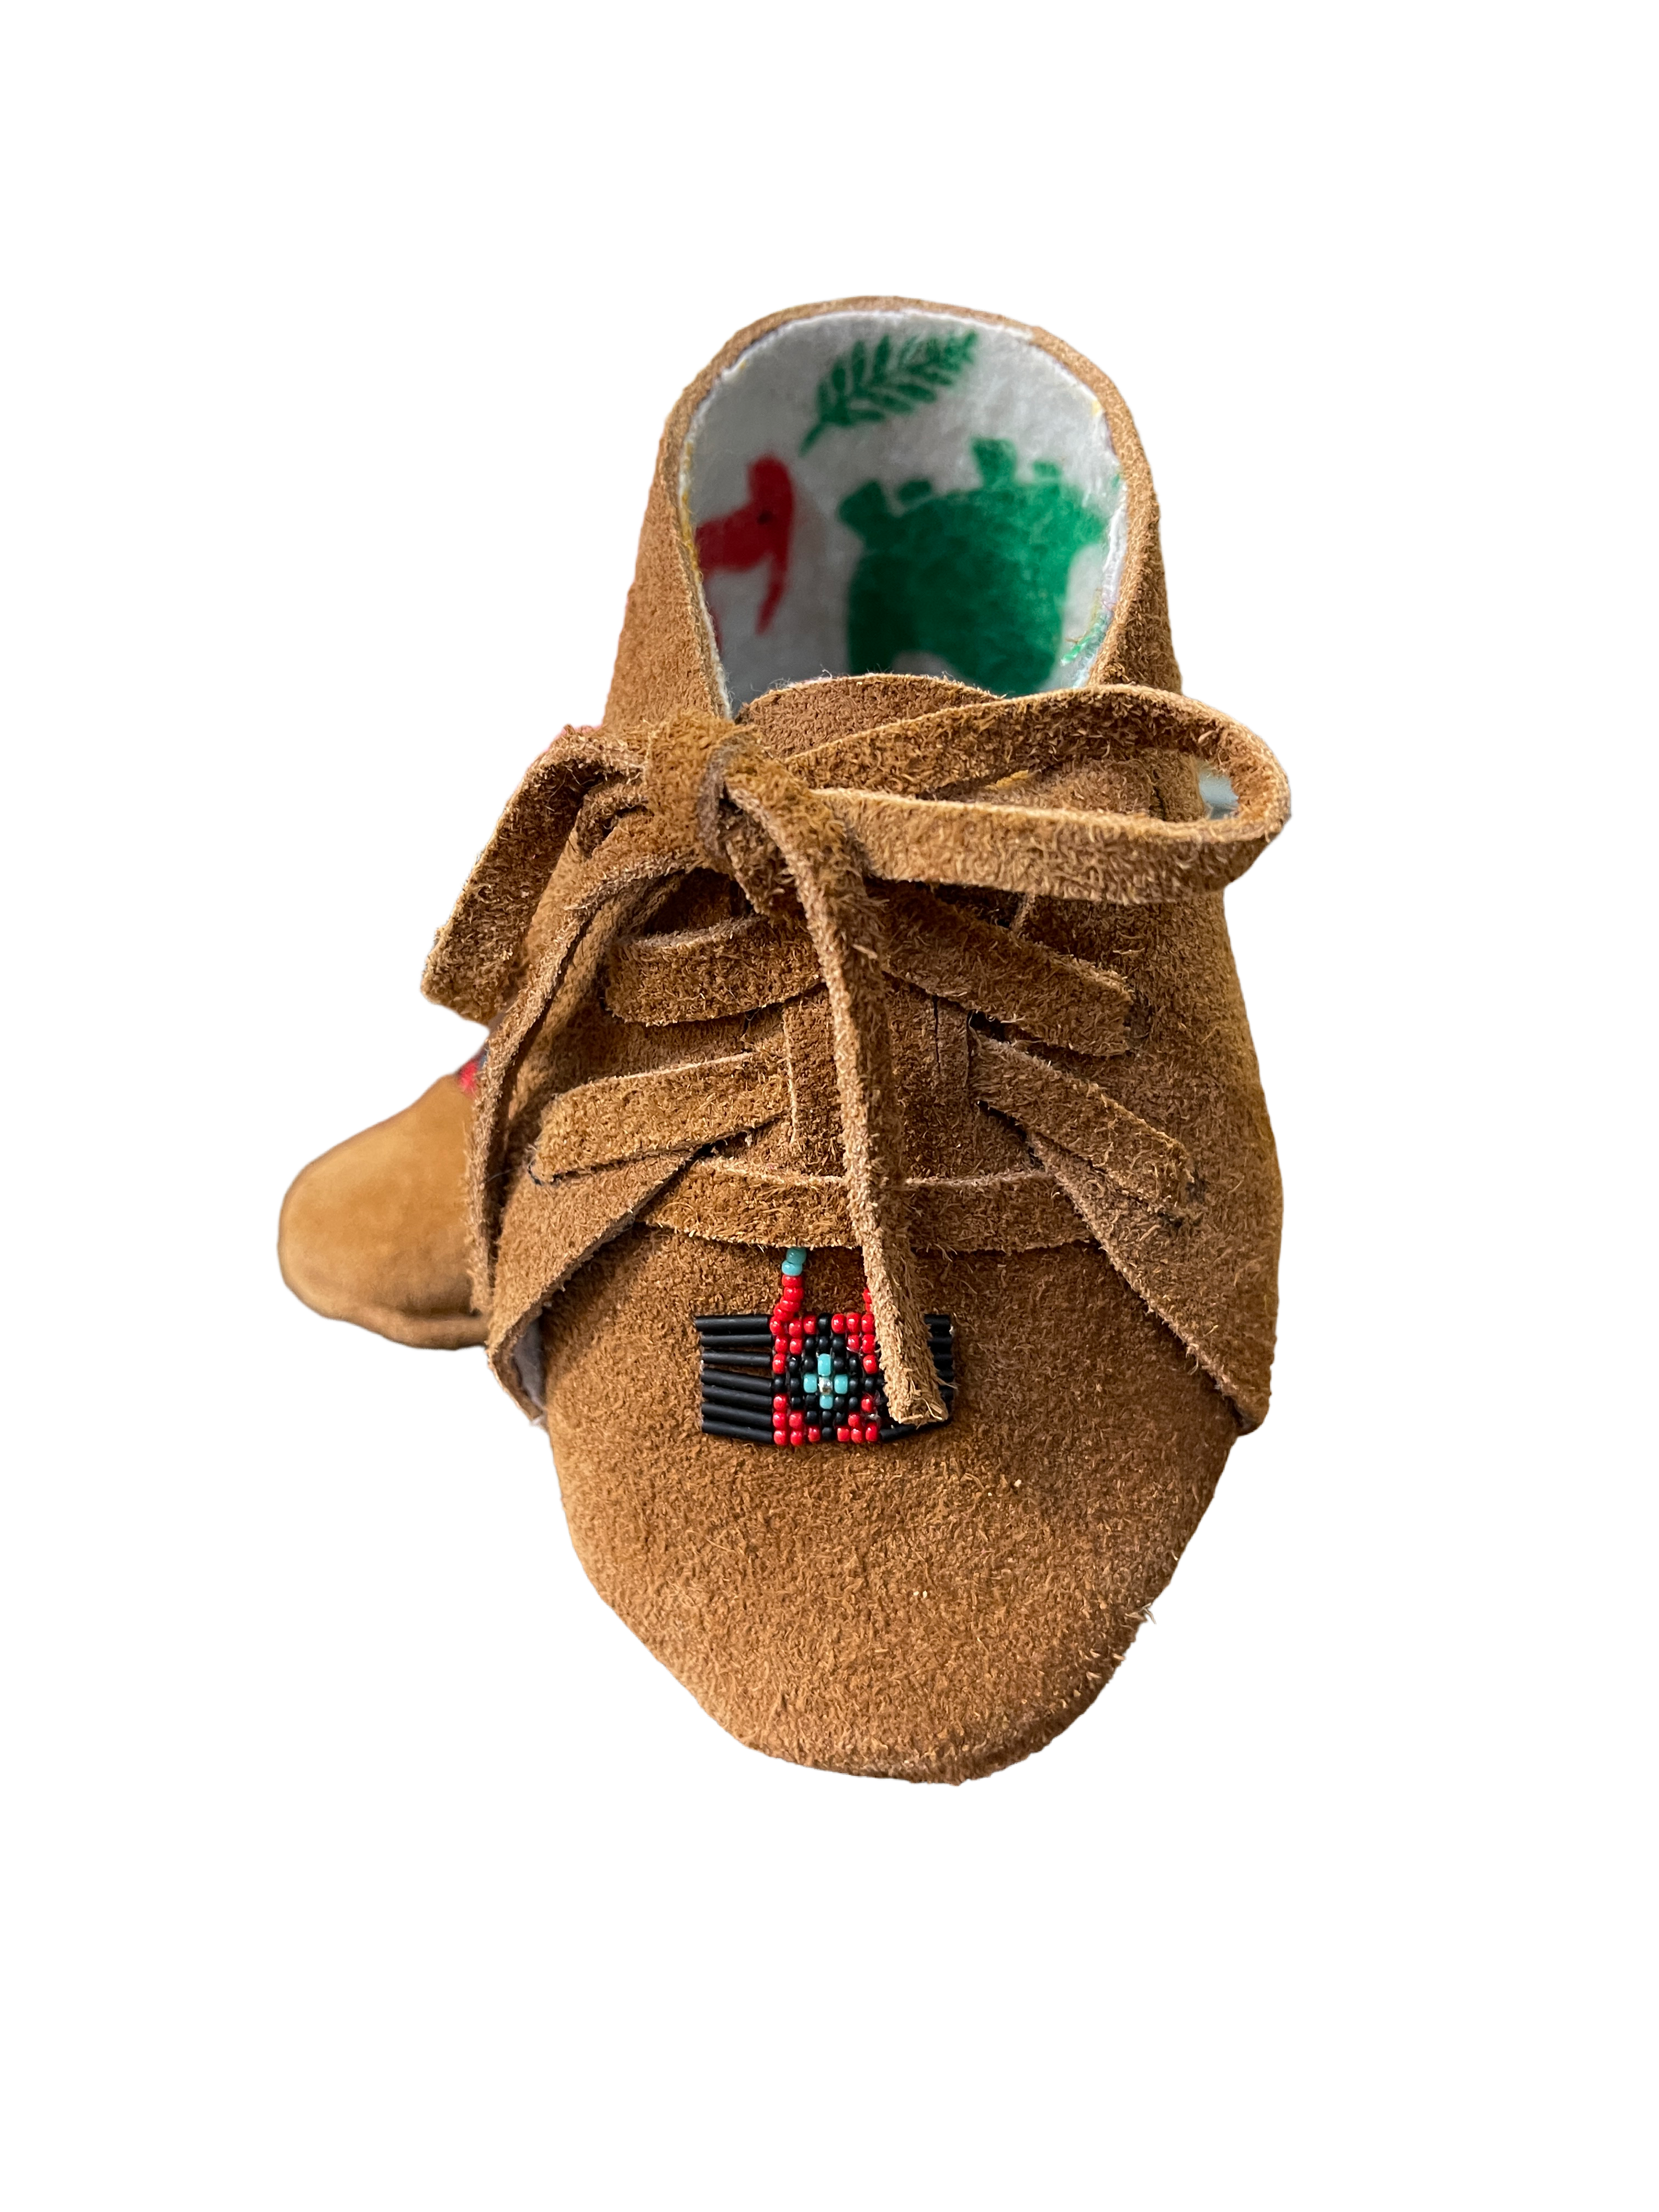 Moccasins - Infant - Suede - Brown - Black, Red, Blue Geometric